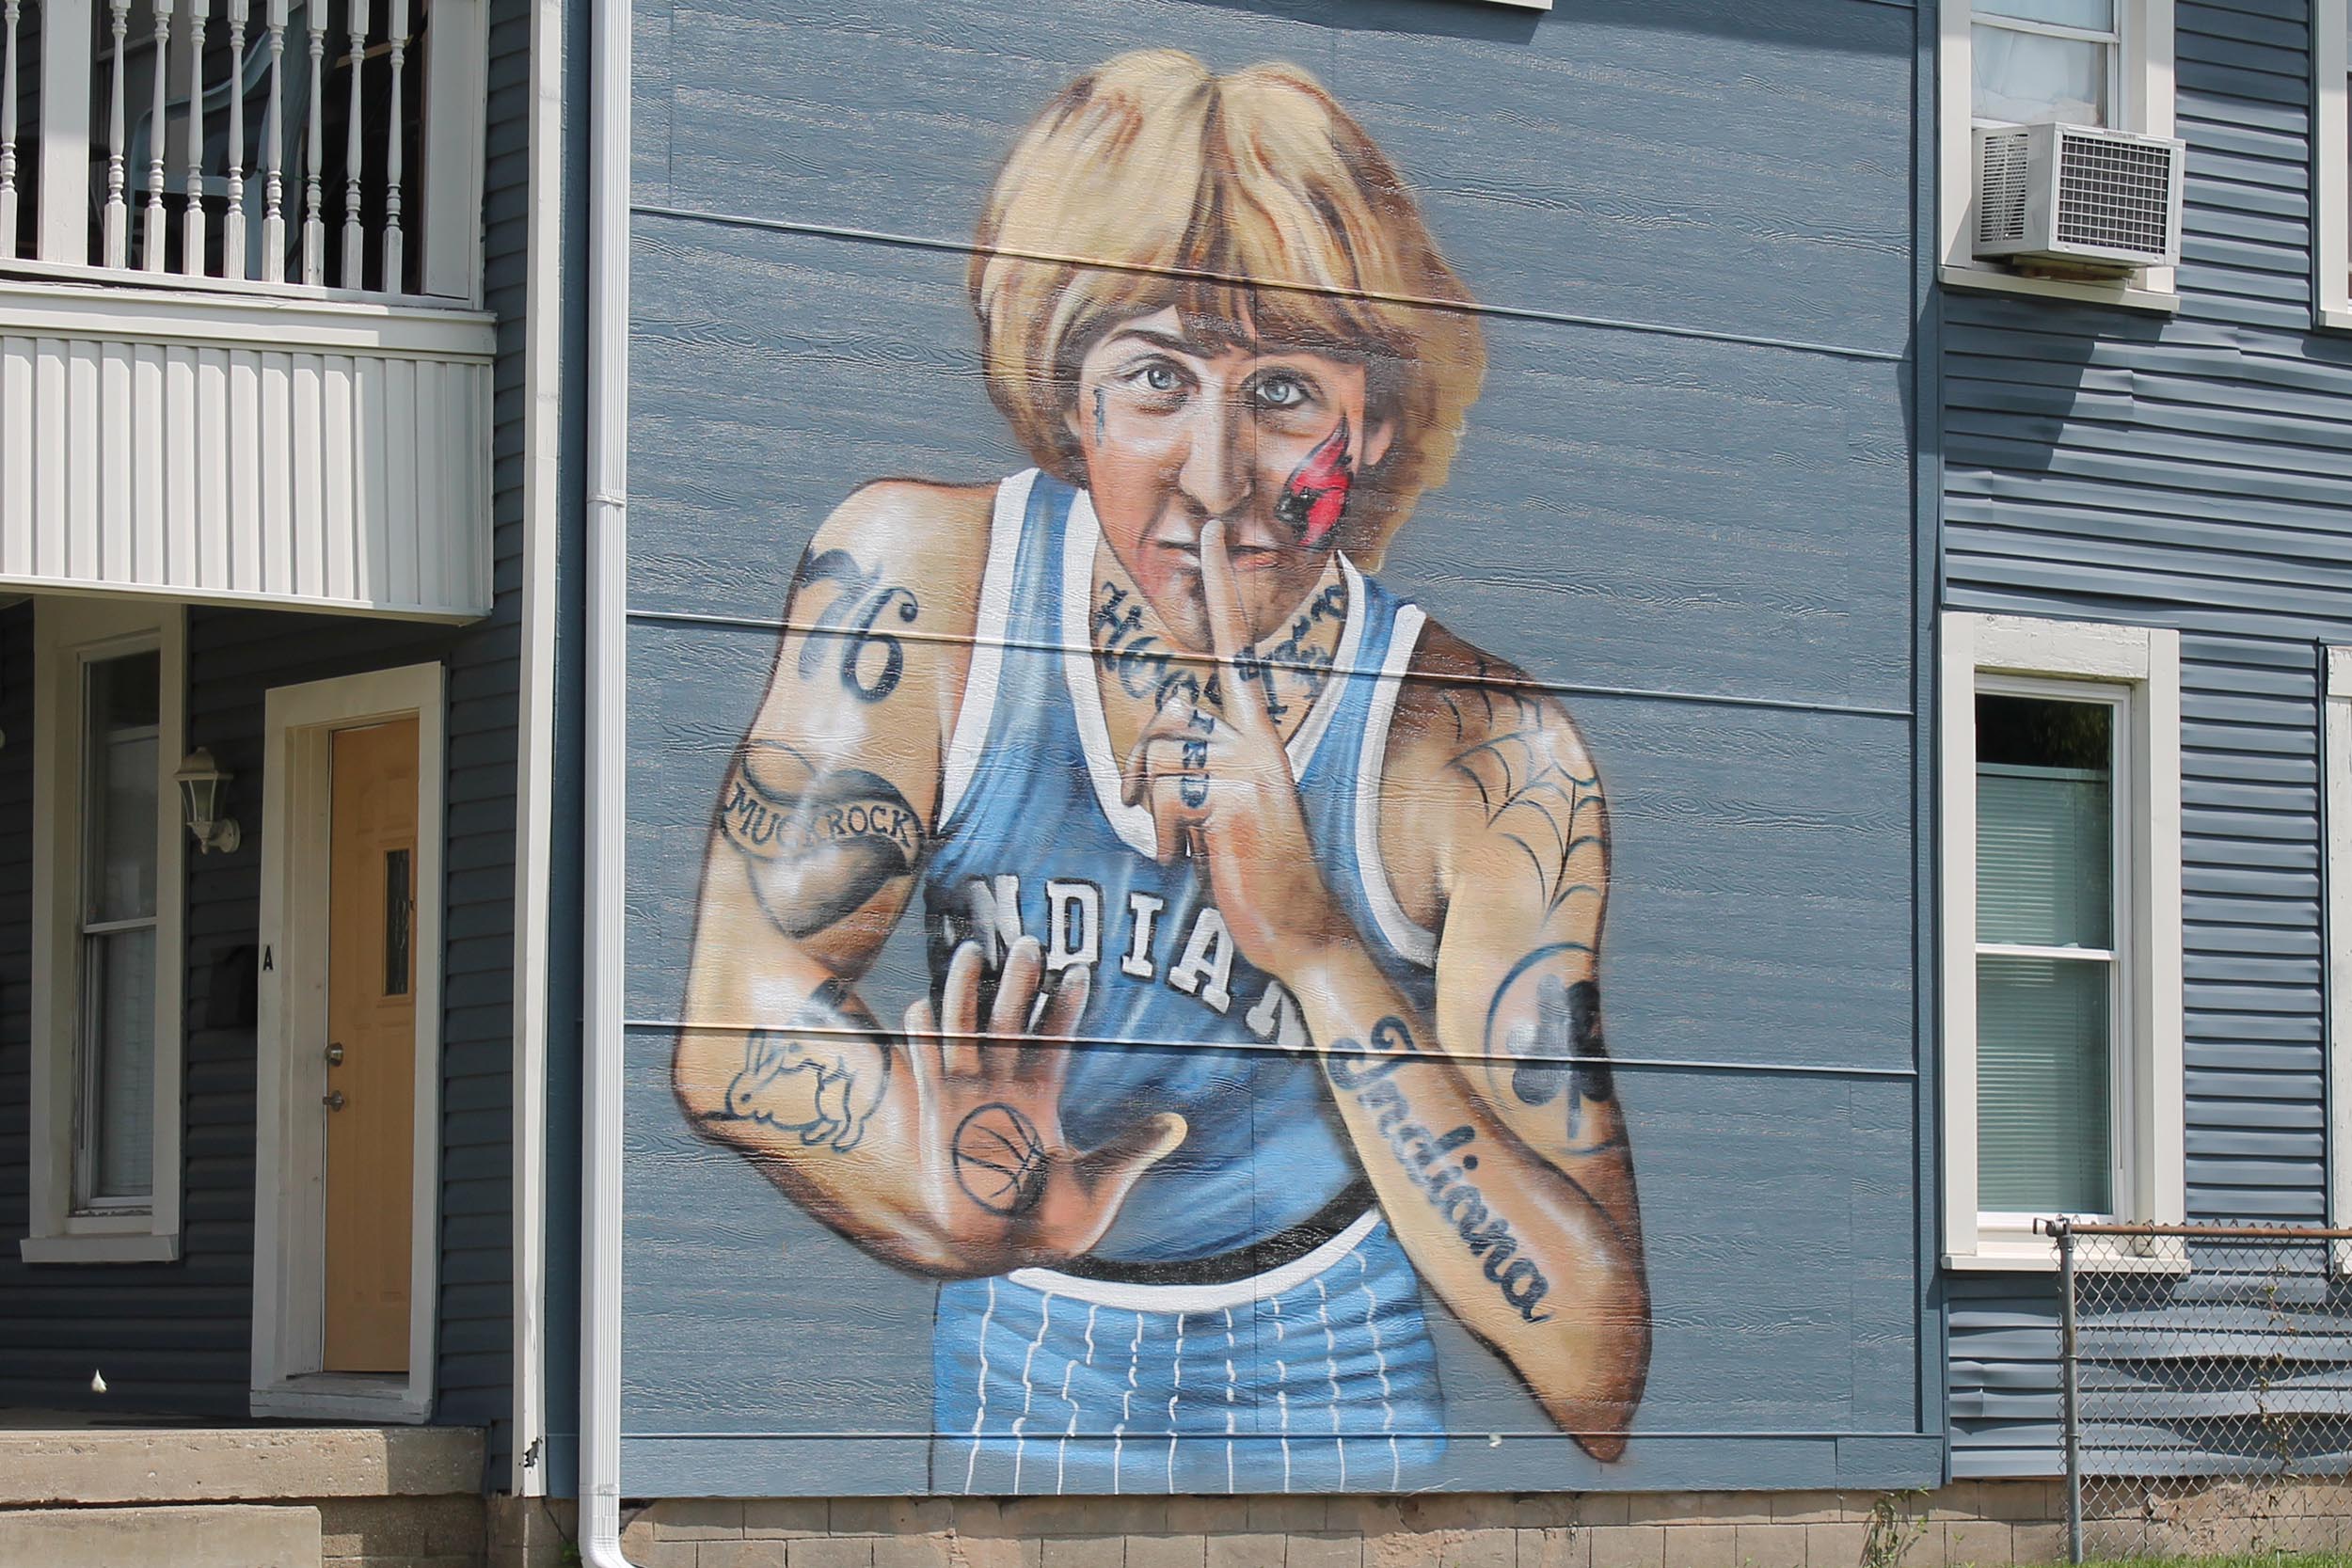 Muck Rock's mural is on the side of a private, multi-family home in Indianapolis's Fountain Square neighborhood.